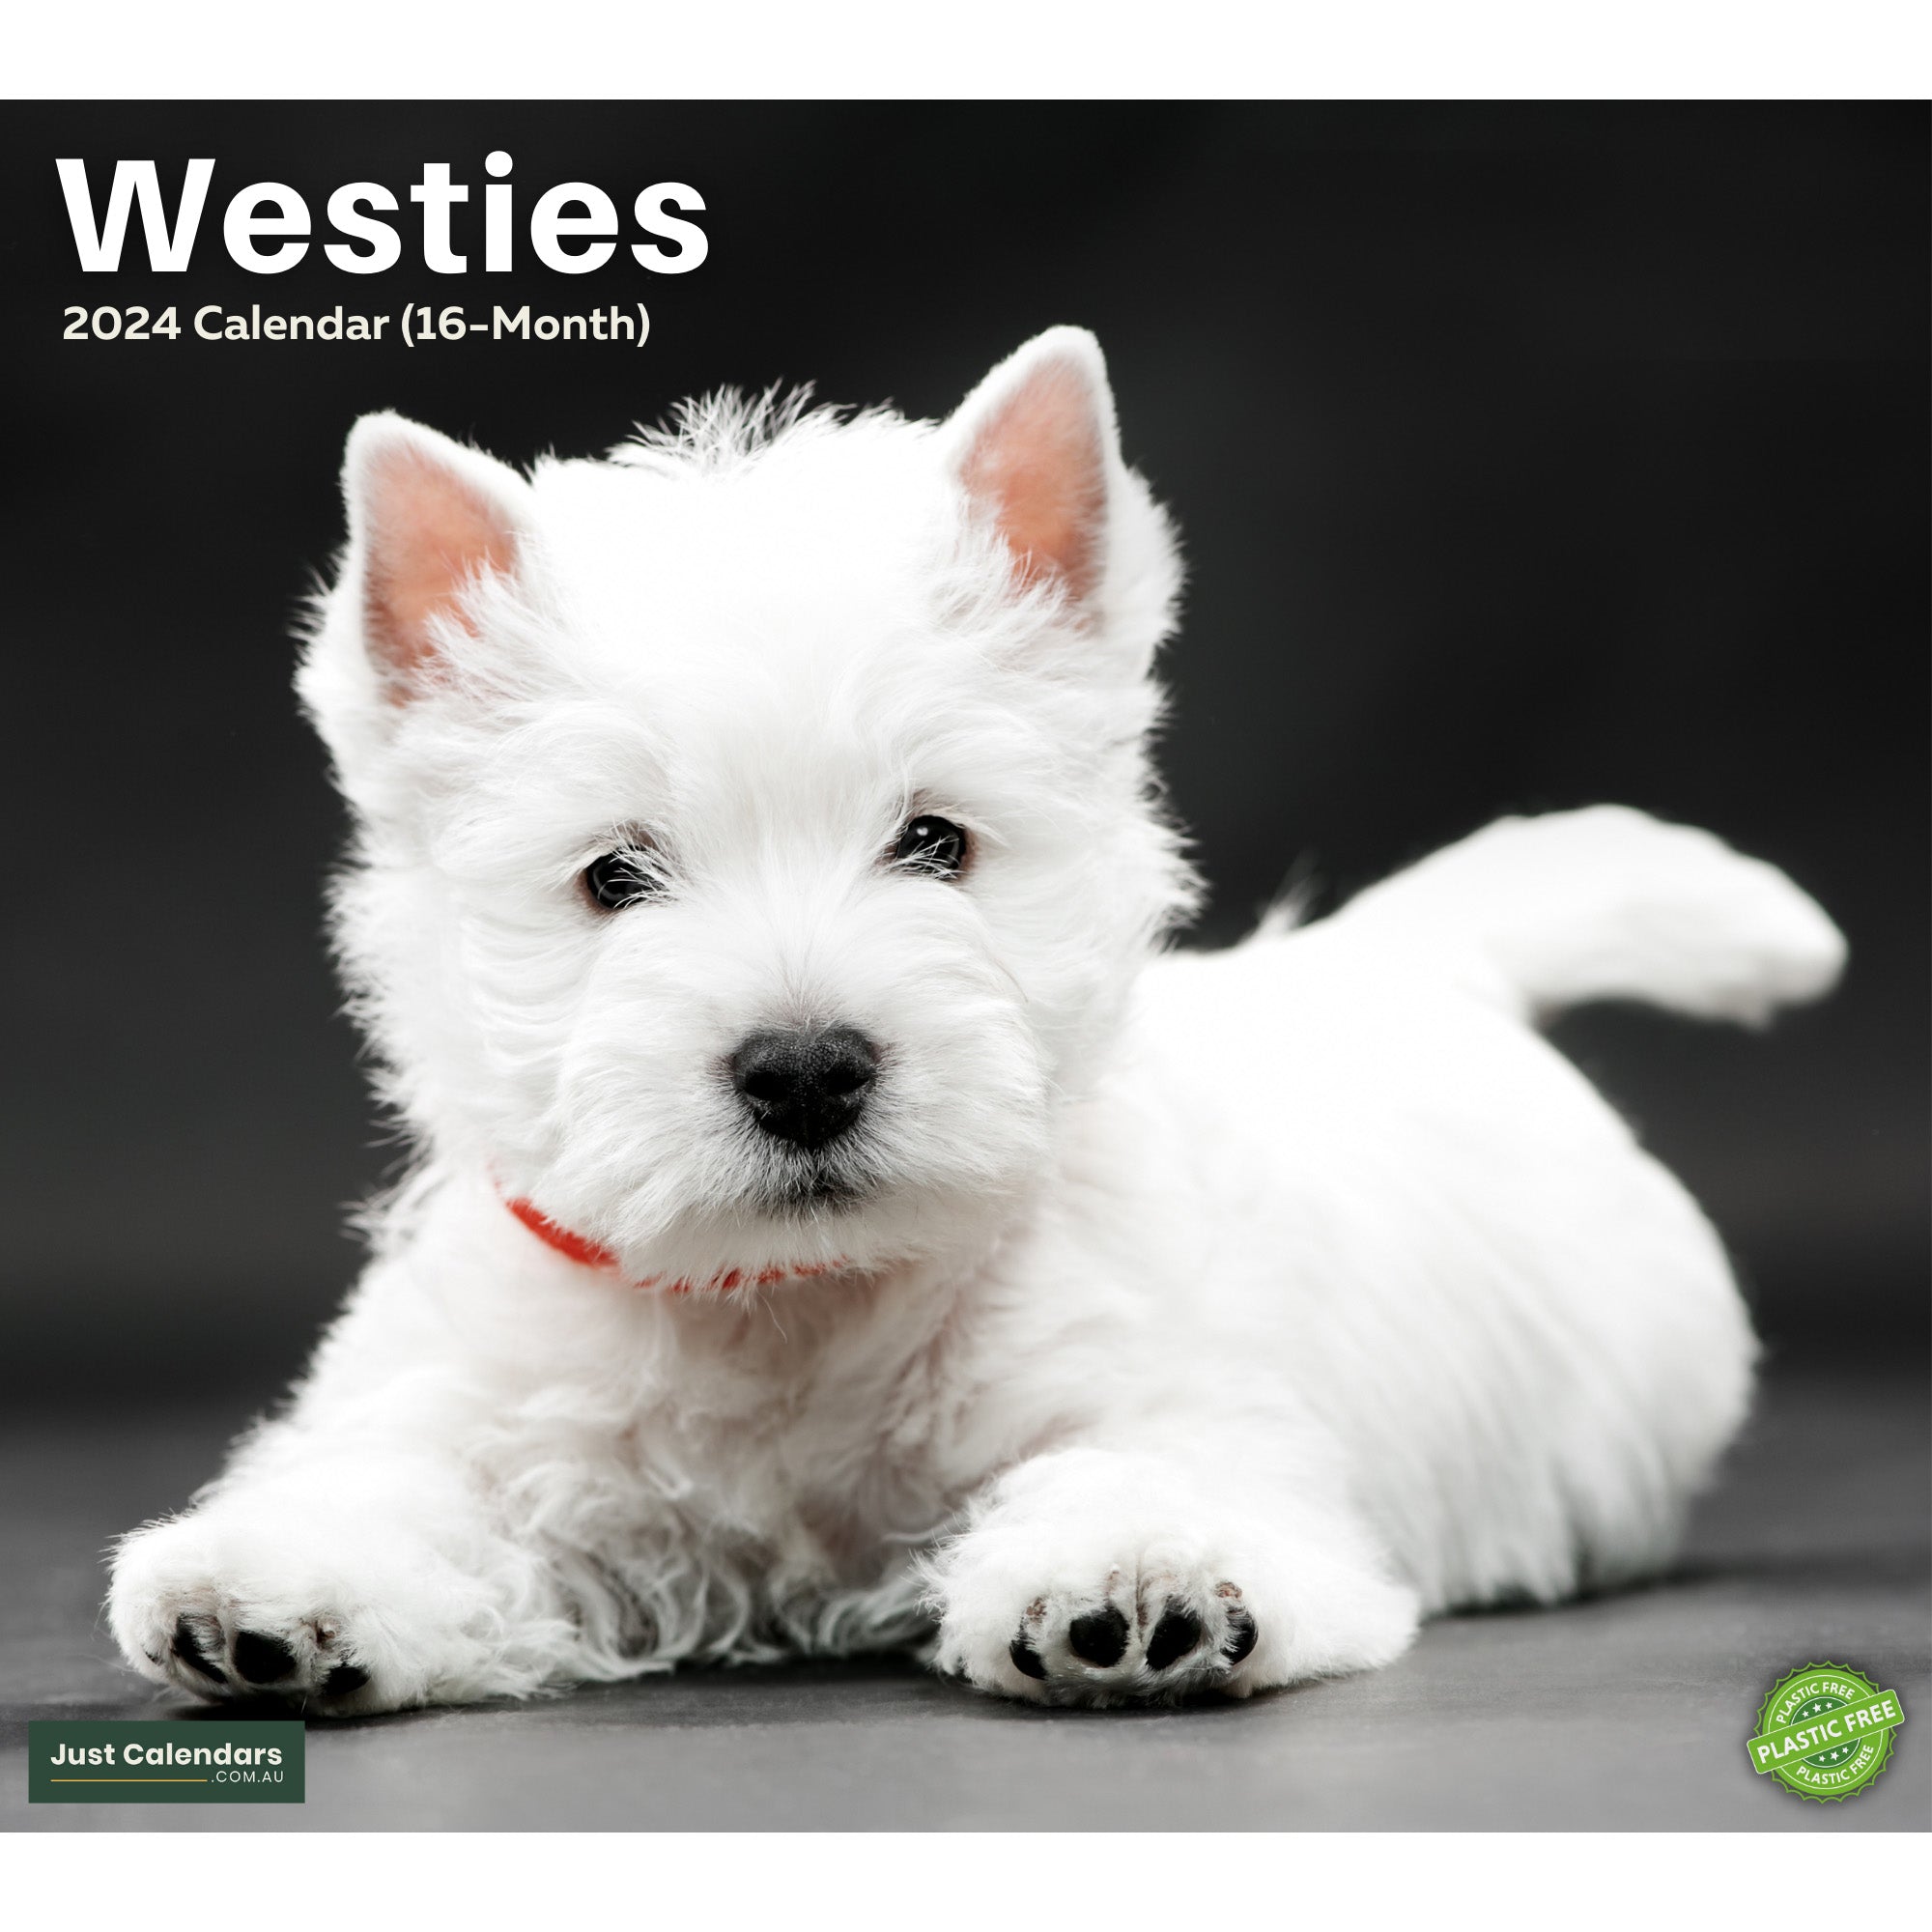 2024 Westies Dogs & Puppies - Deluxe Wall Calendar by Just Calendars - 16 Month - Plastic Free